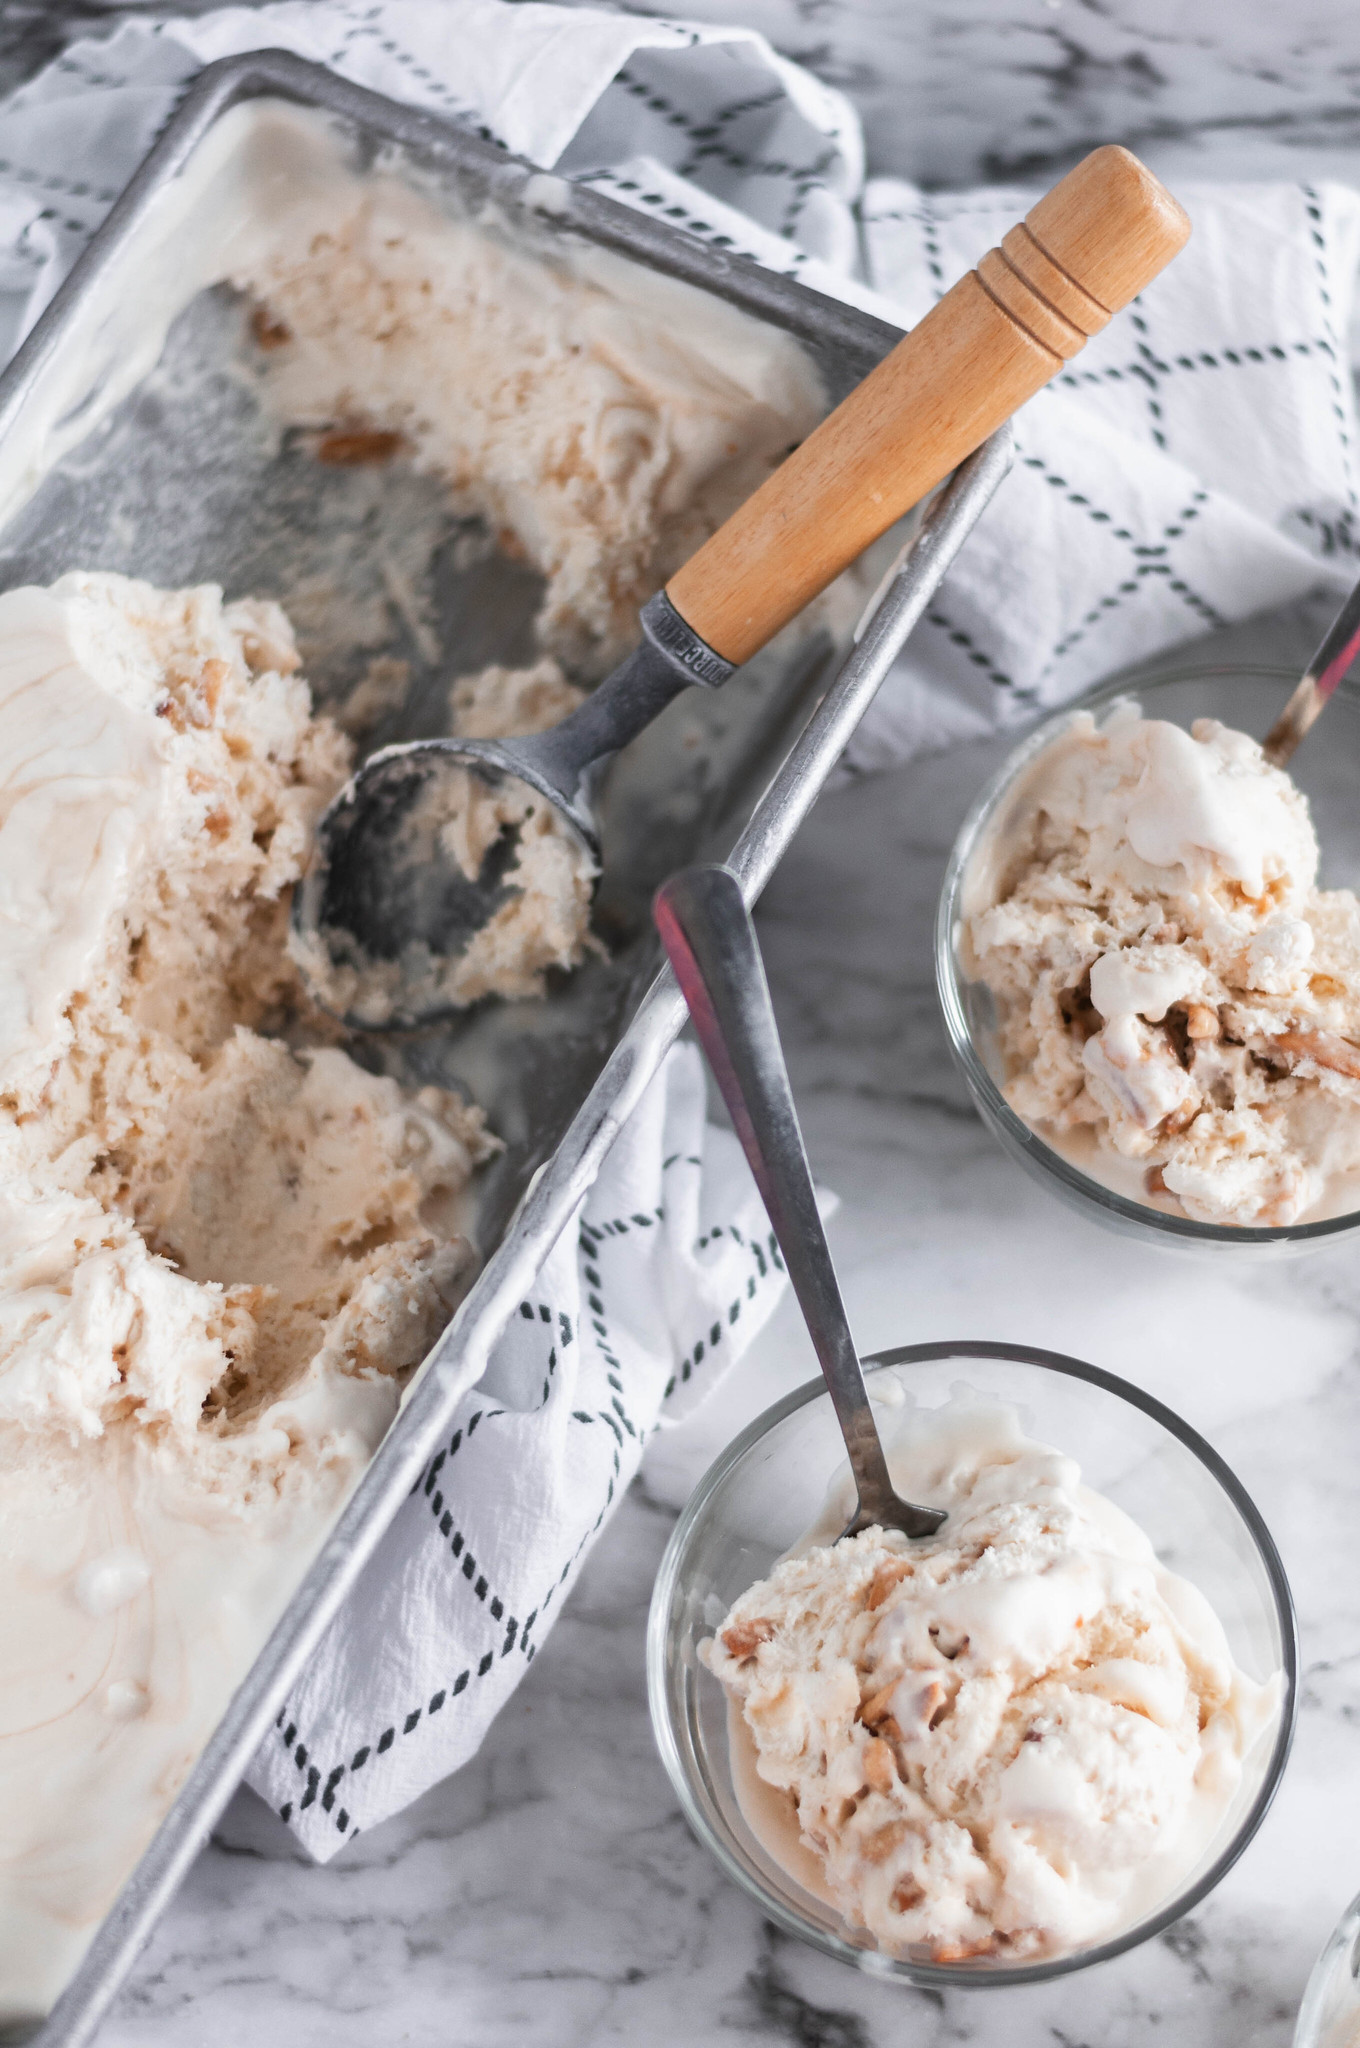 No ice cream machine needed to make this No Churn Caramel Ice Cream. It's packed with rich caramel and candied almonds for crunch.